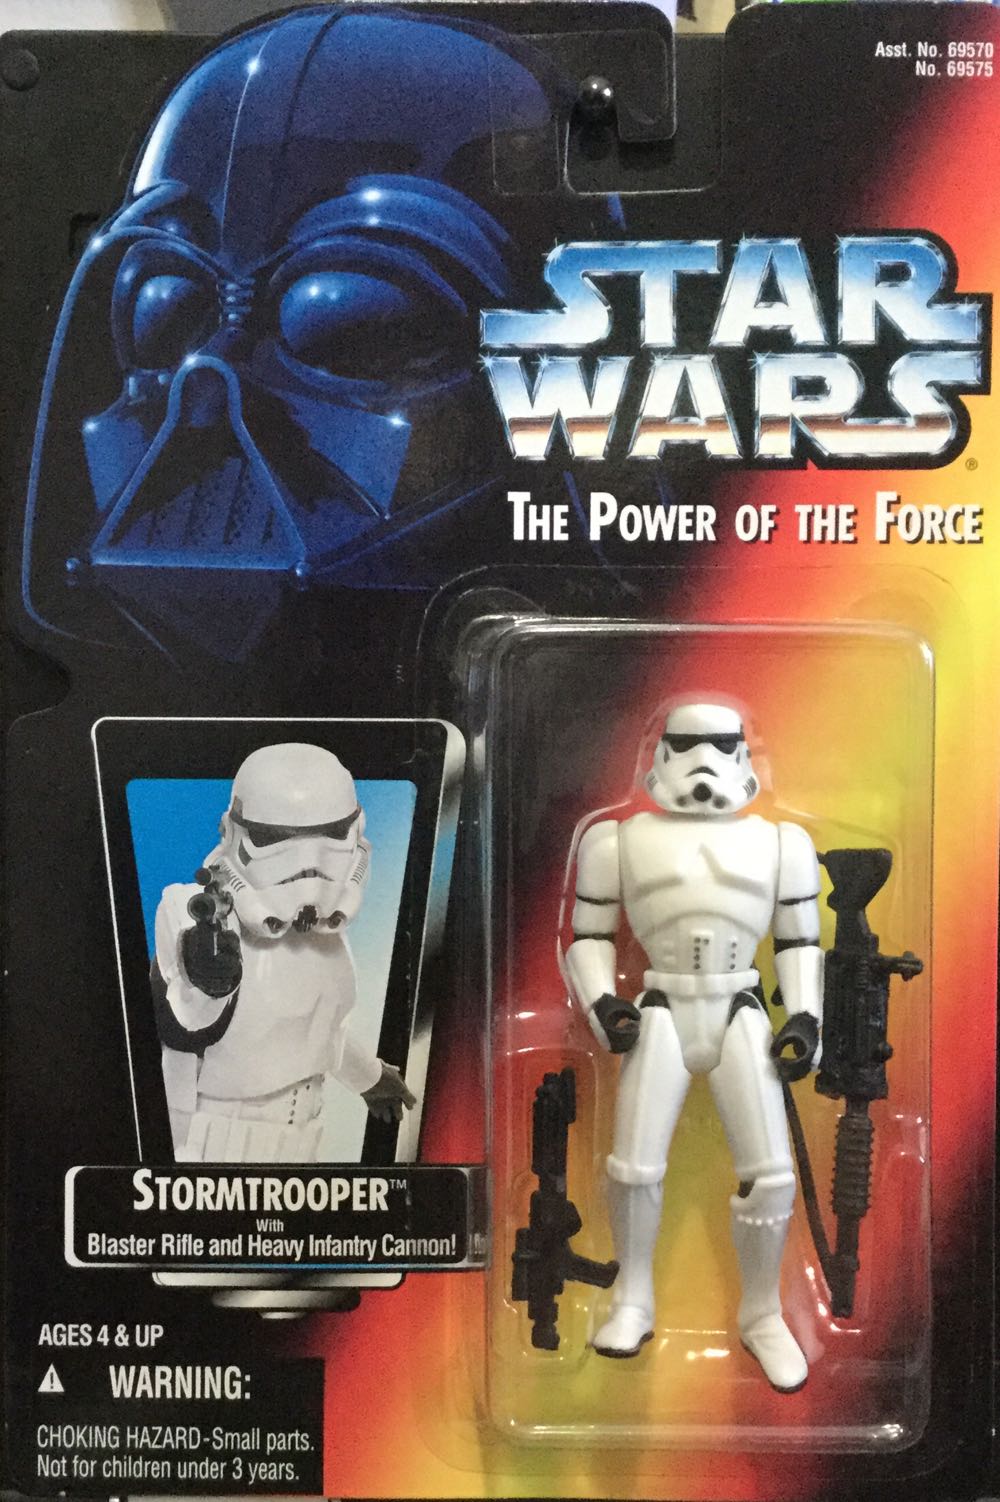 Power Of The Force (RC) - Stormtrooper - Hasbro / Kenner (A New Hope) action figure collectible - Main Image 1